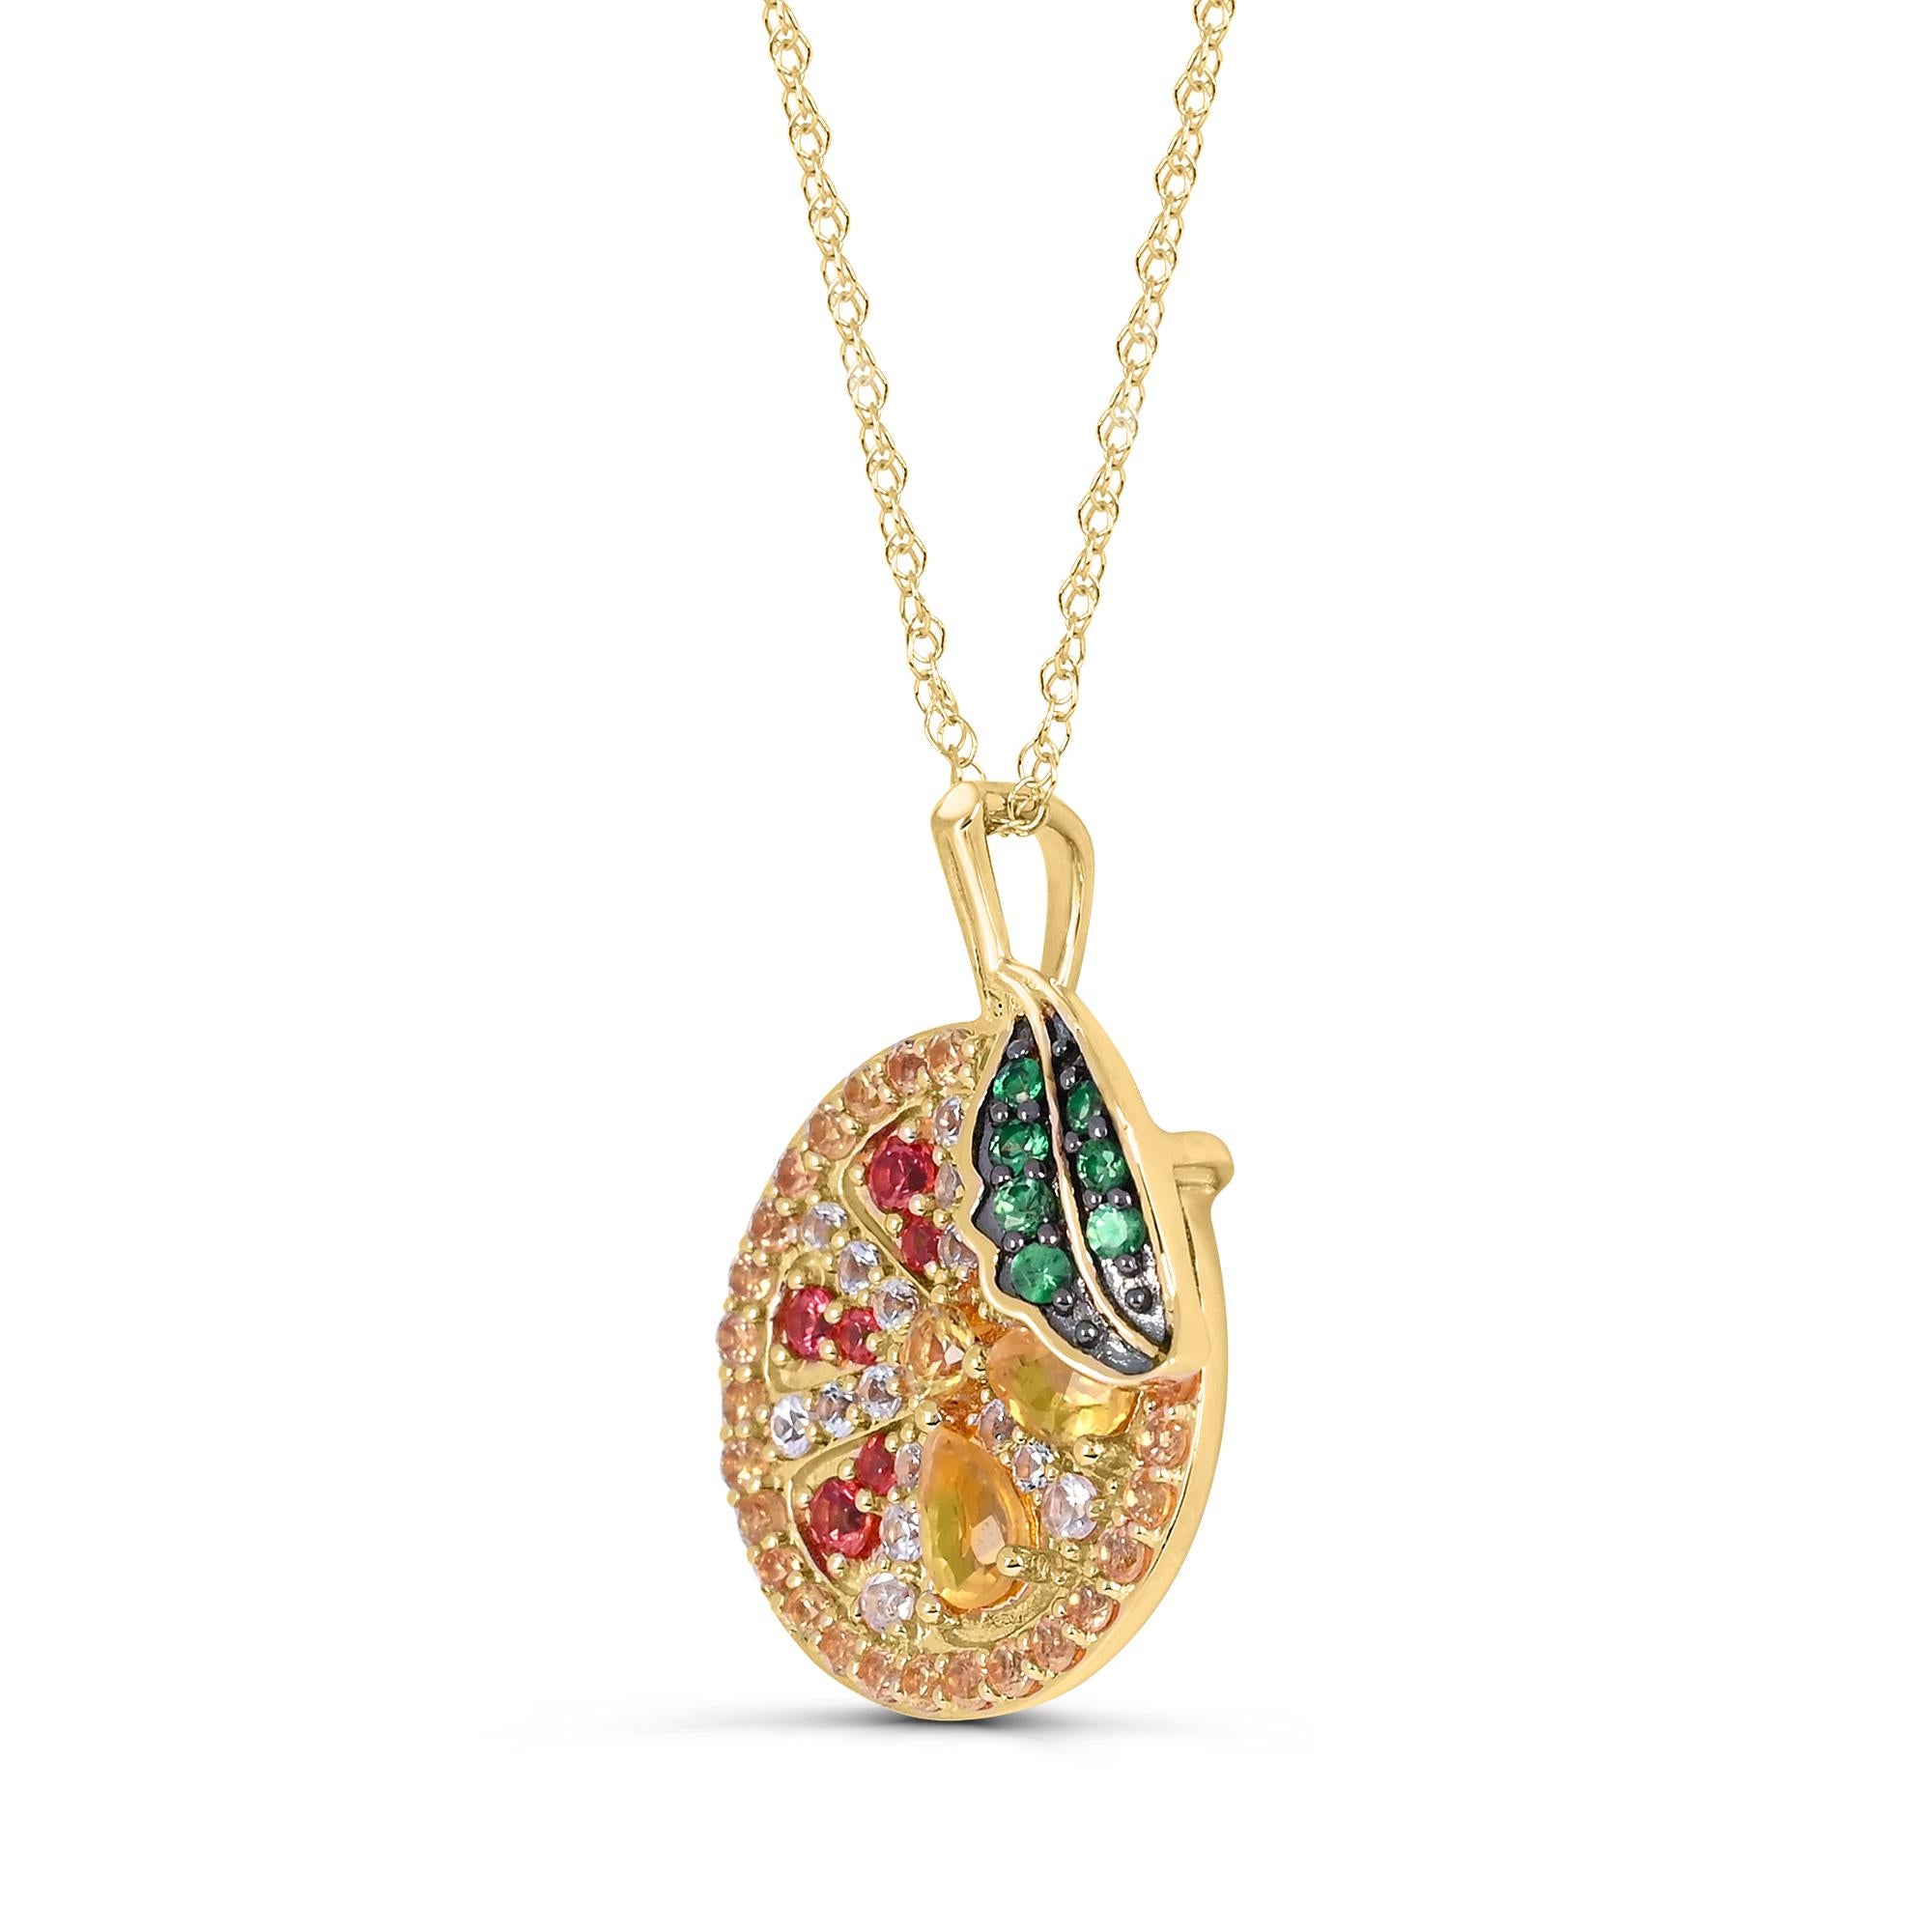 Indulge in the ingenious design of our Yellow Hues Sapphire and Tsavorite Orange Pendant in 14K Yellow Gold. Crafted with meticulous attention to detail, this pendant boasts a stunning combination of various sized round sapphires and sparkling round